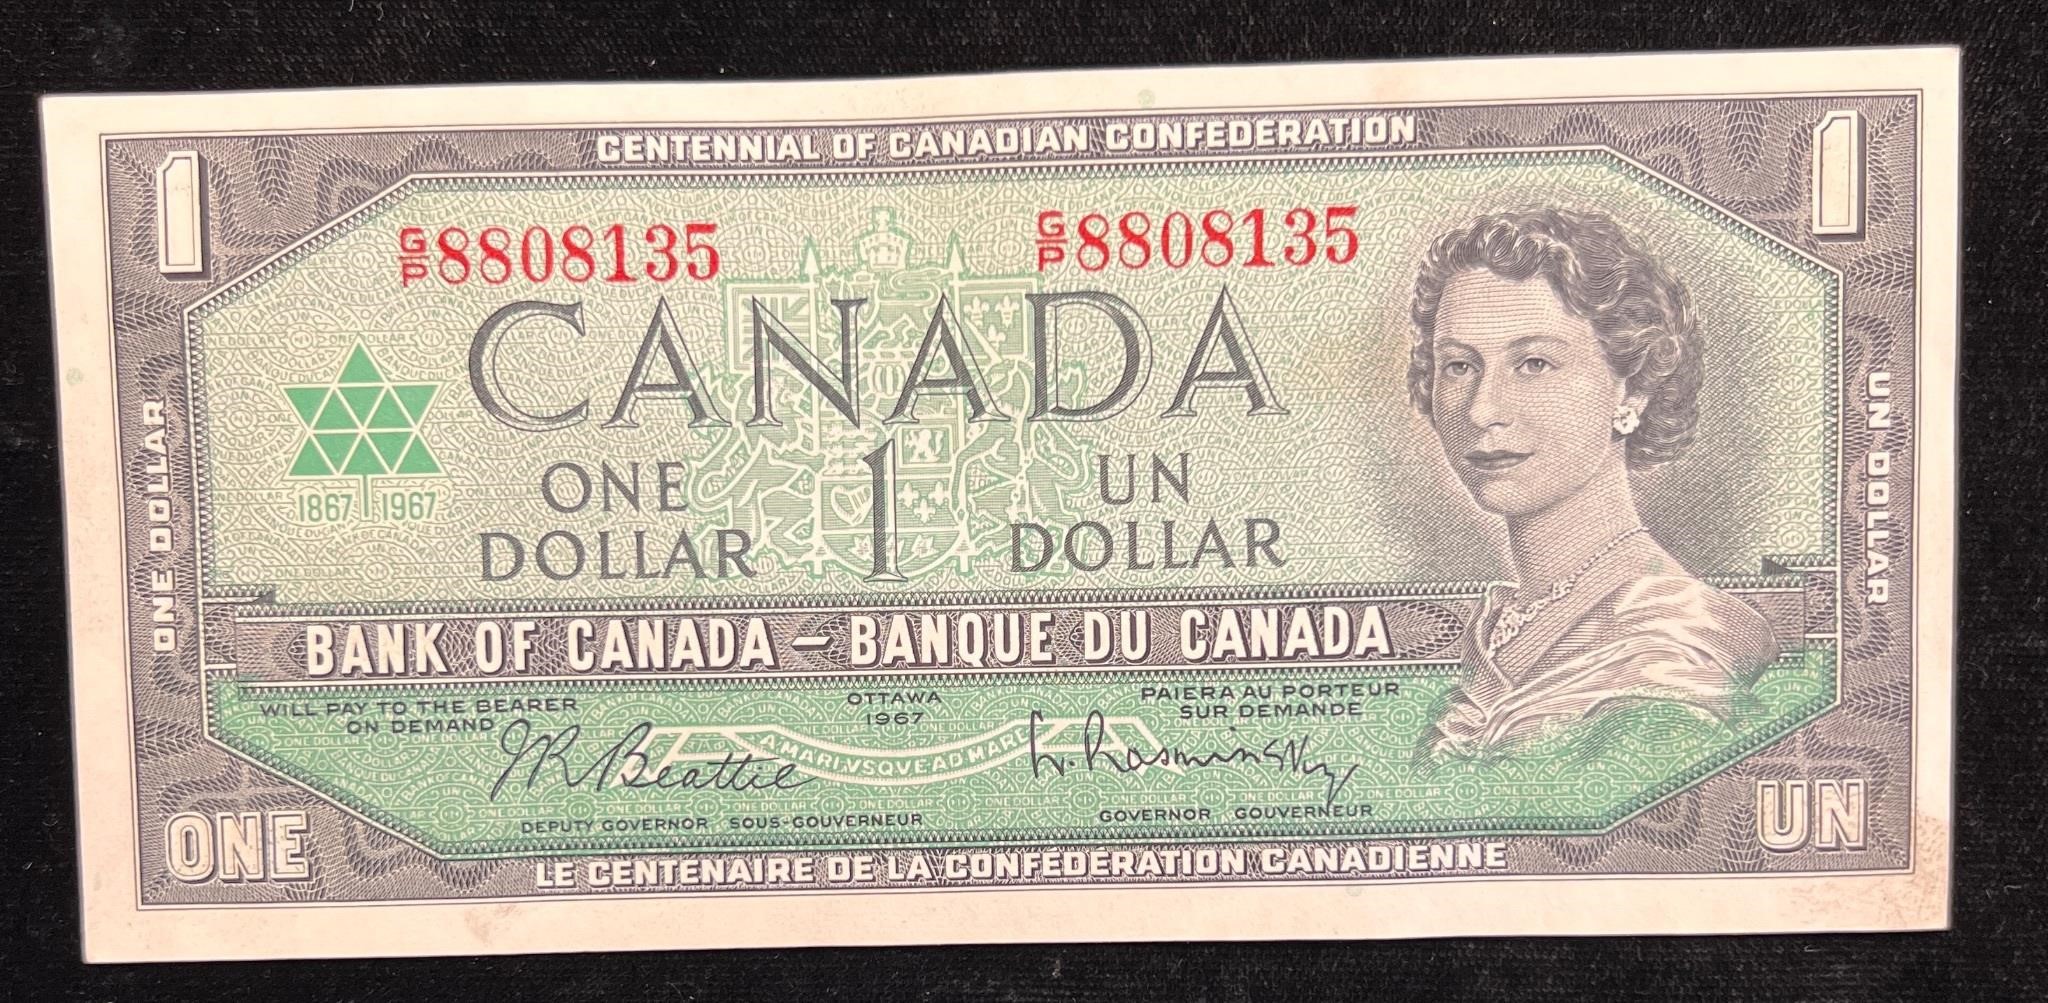 1967 Uncirculated 1 Dollar Bank of Canada Note